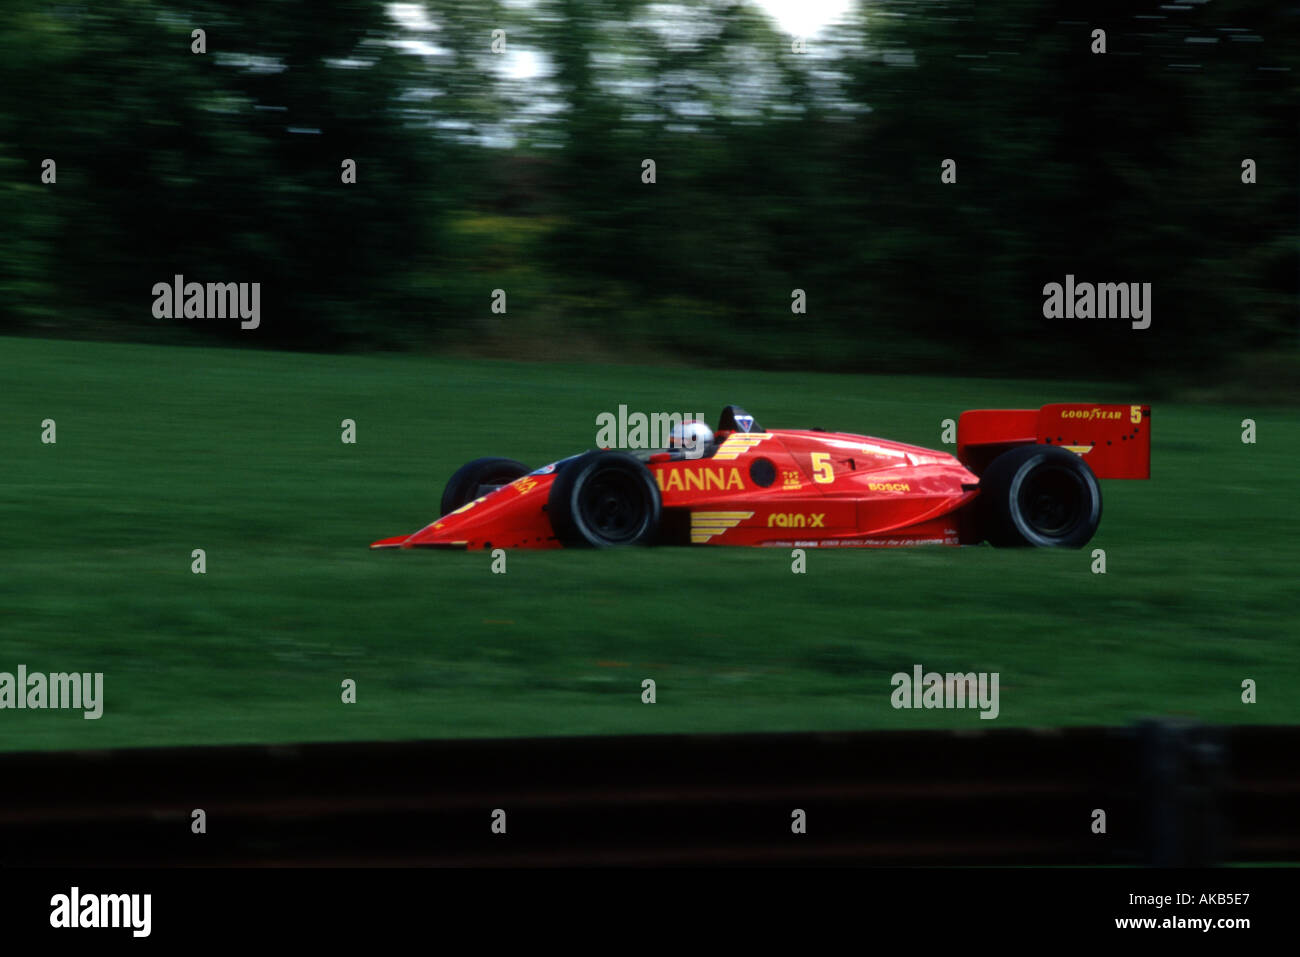 A sleek bright red race car with driver wearing a helmet speeds across a blurred green forest background Stock Photo